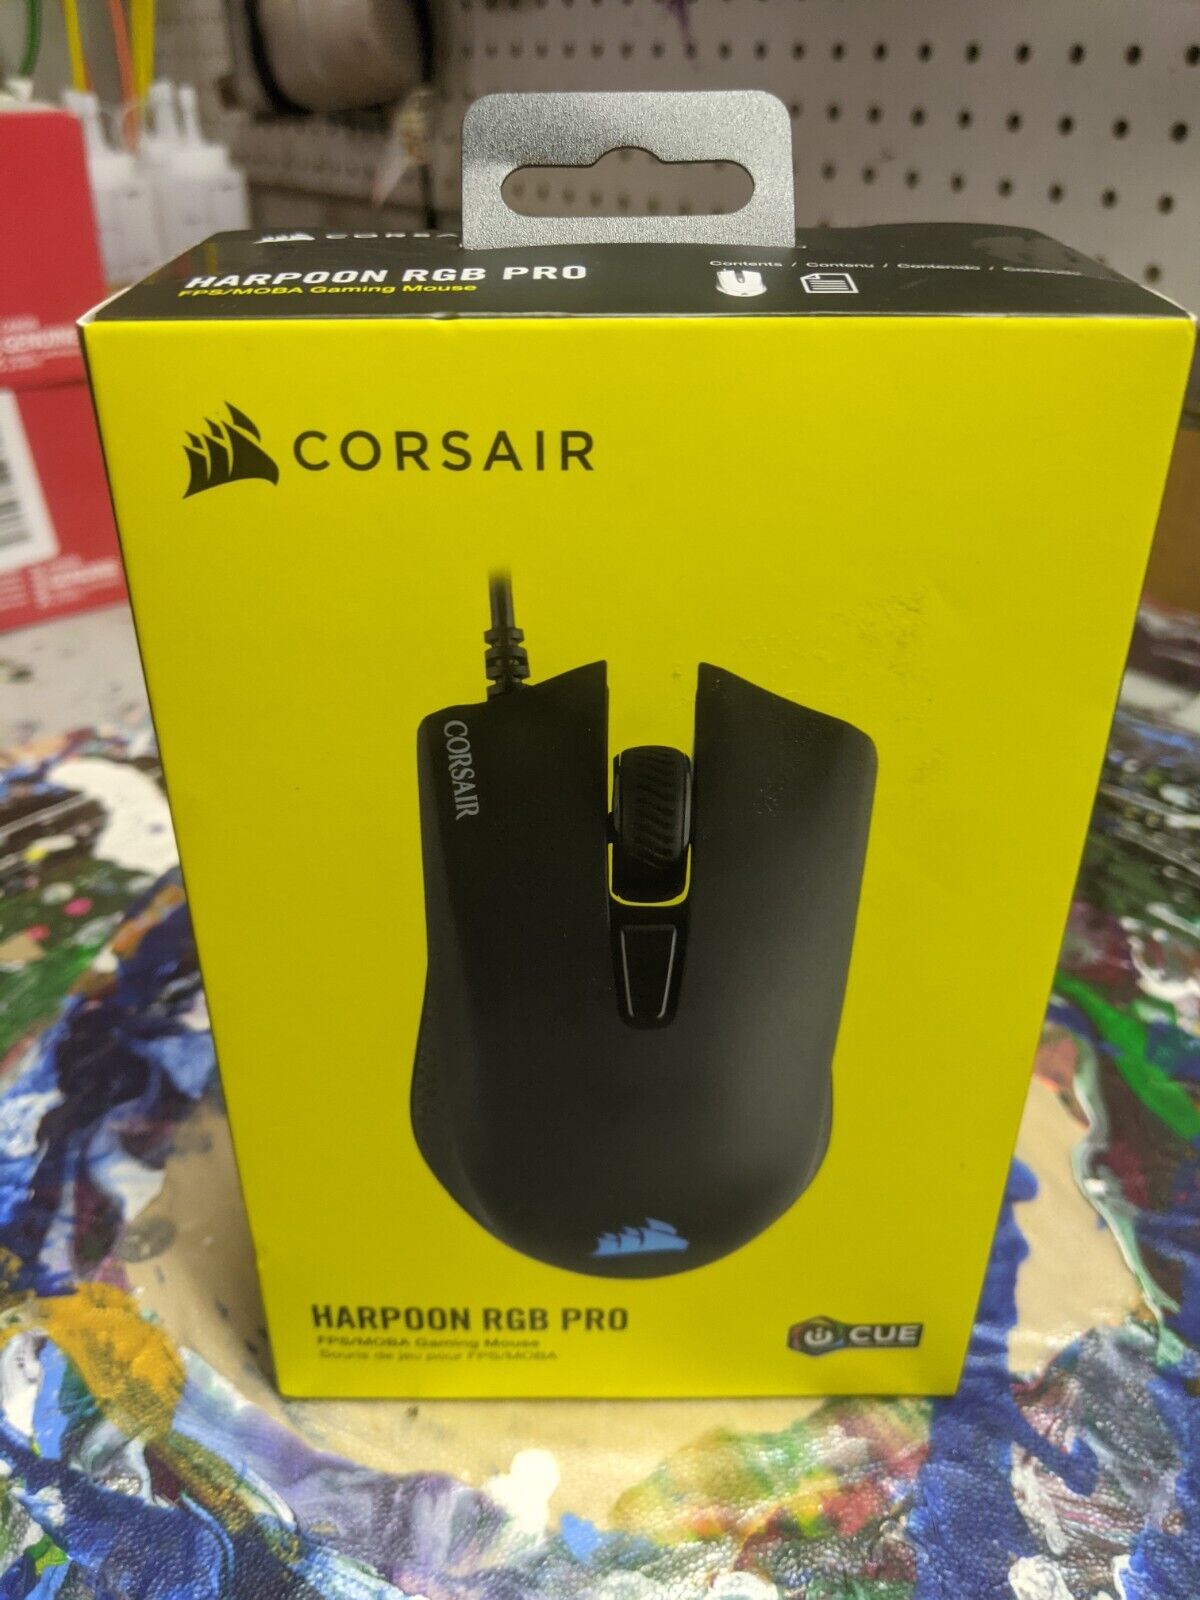 Corsair HARPOON RGB PRO FPS/MOBA Gaming Mouse - 12,000 DPI - NEW IN BOX